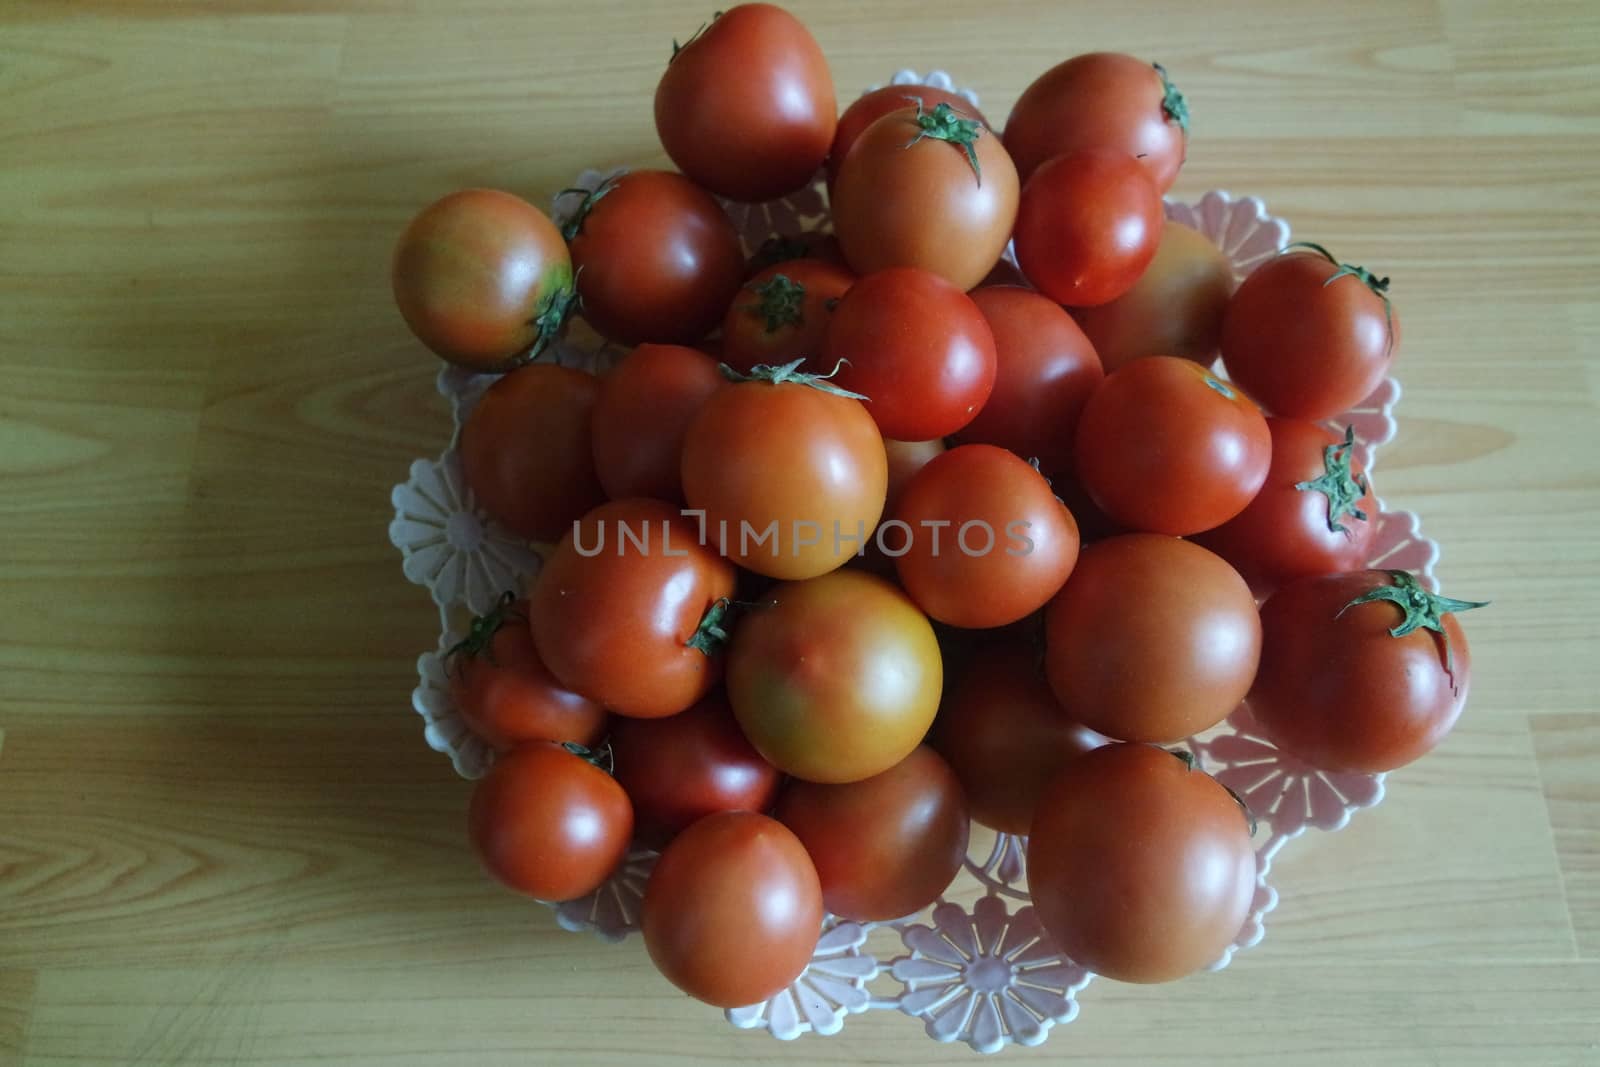 Close-up view of red tomatoes in white basket on a wooden floor in market for sale. A fruit background for text and advertisements